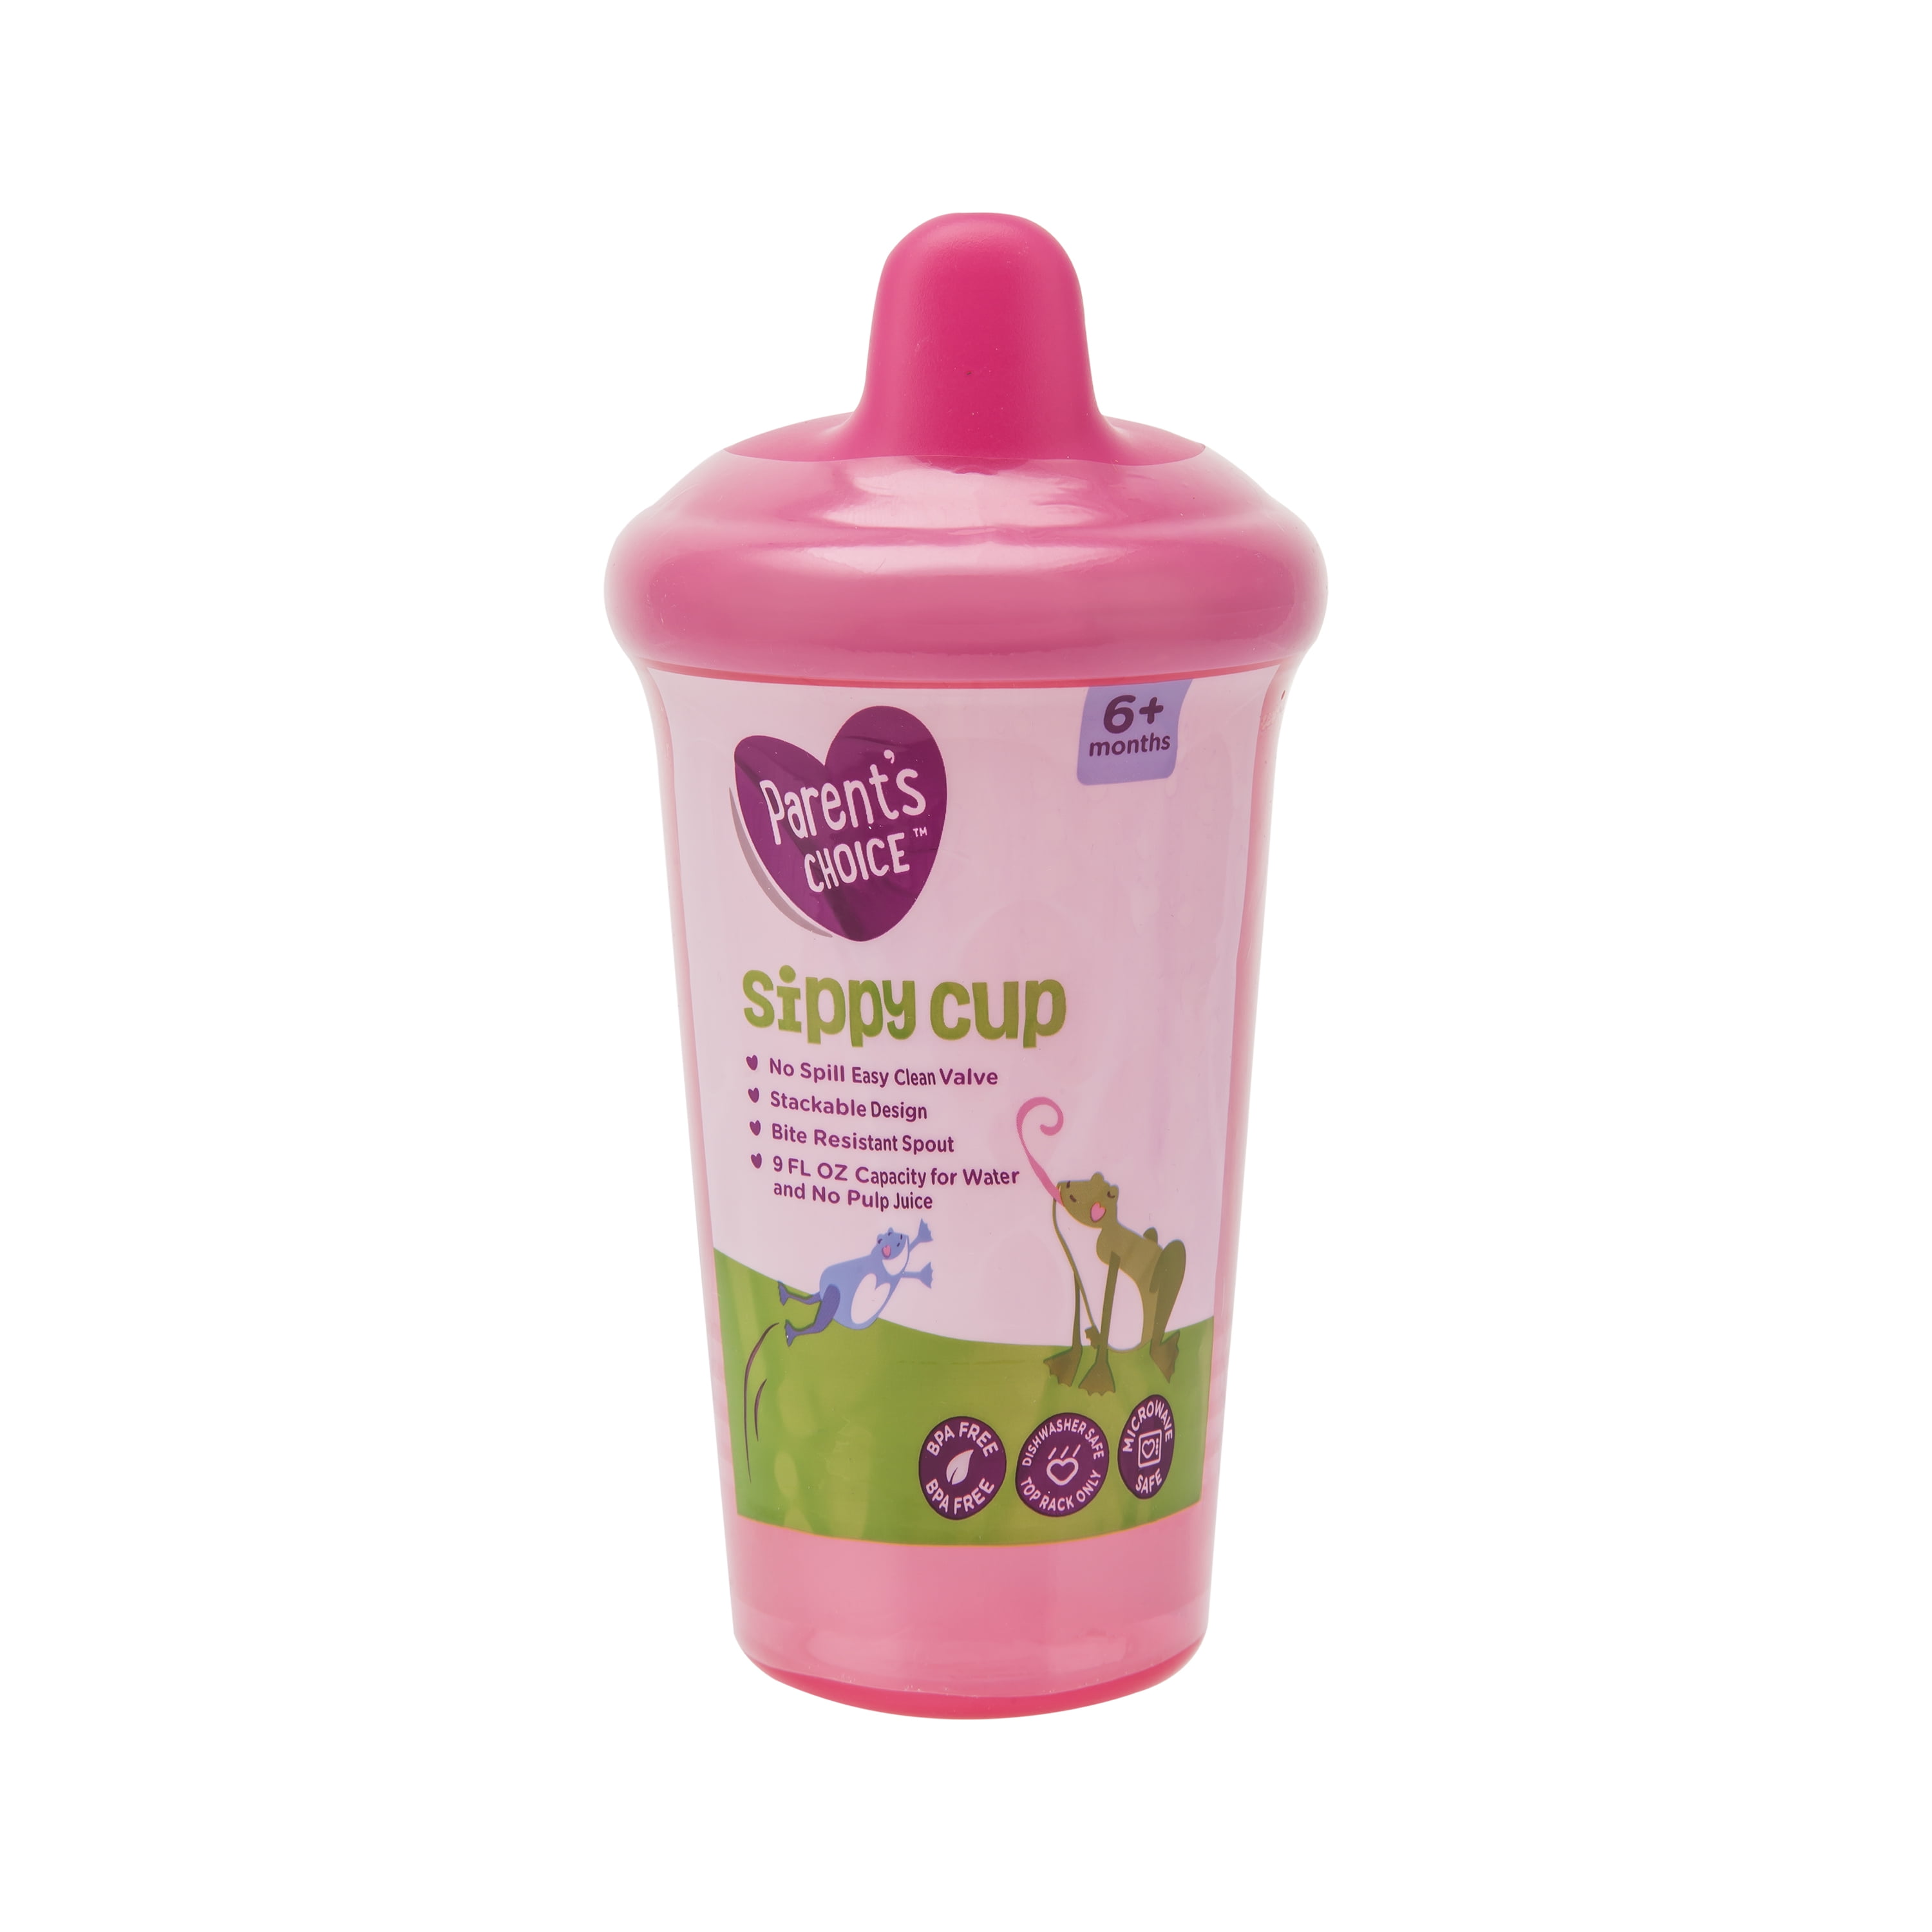 Primo Passi - Straw Cup 9oz. Pink